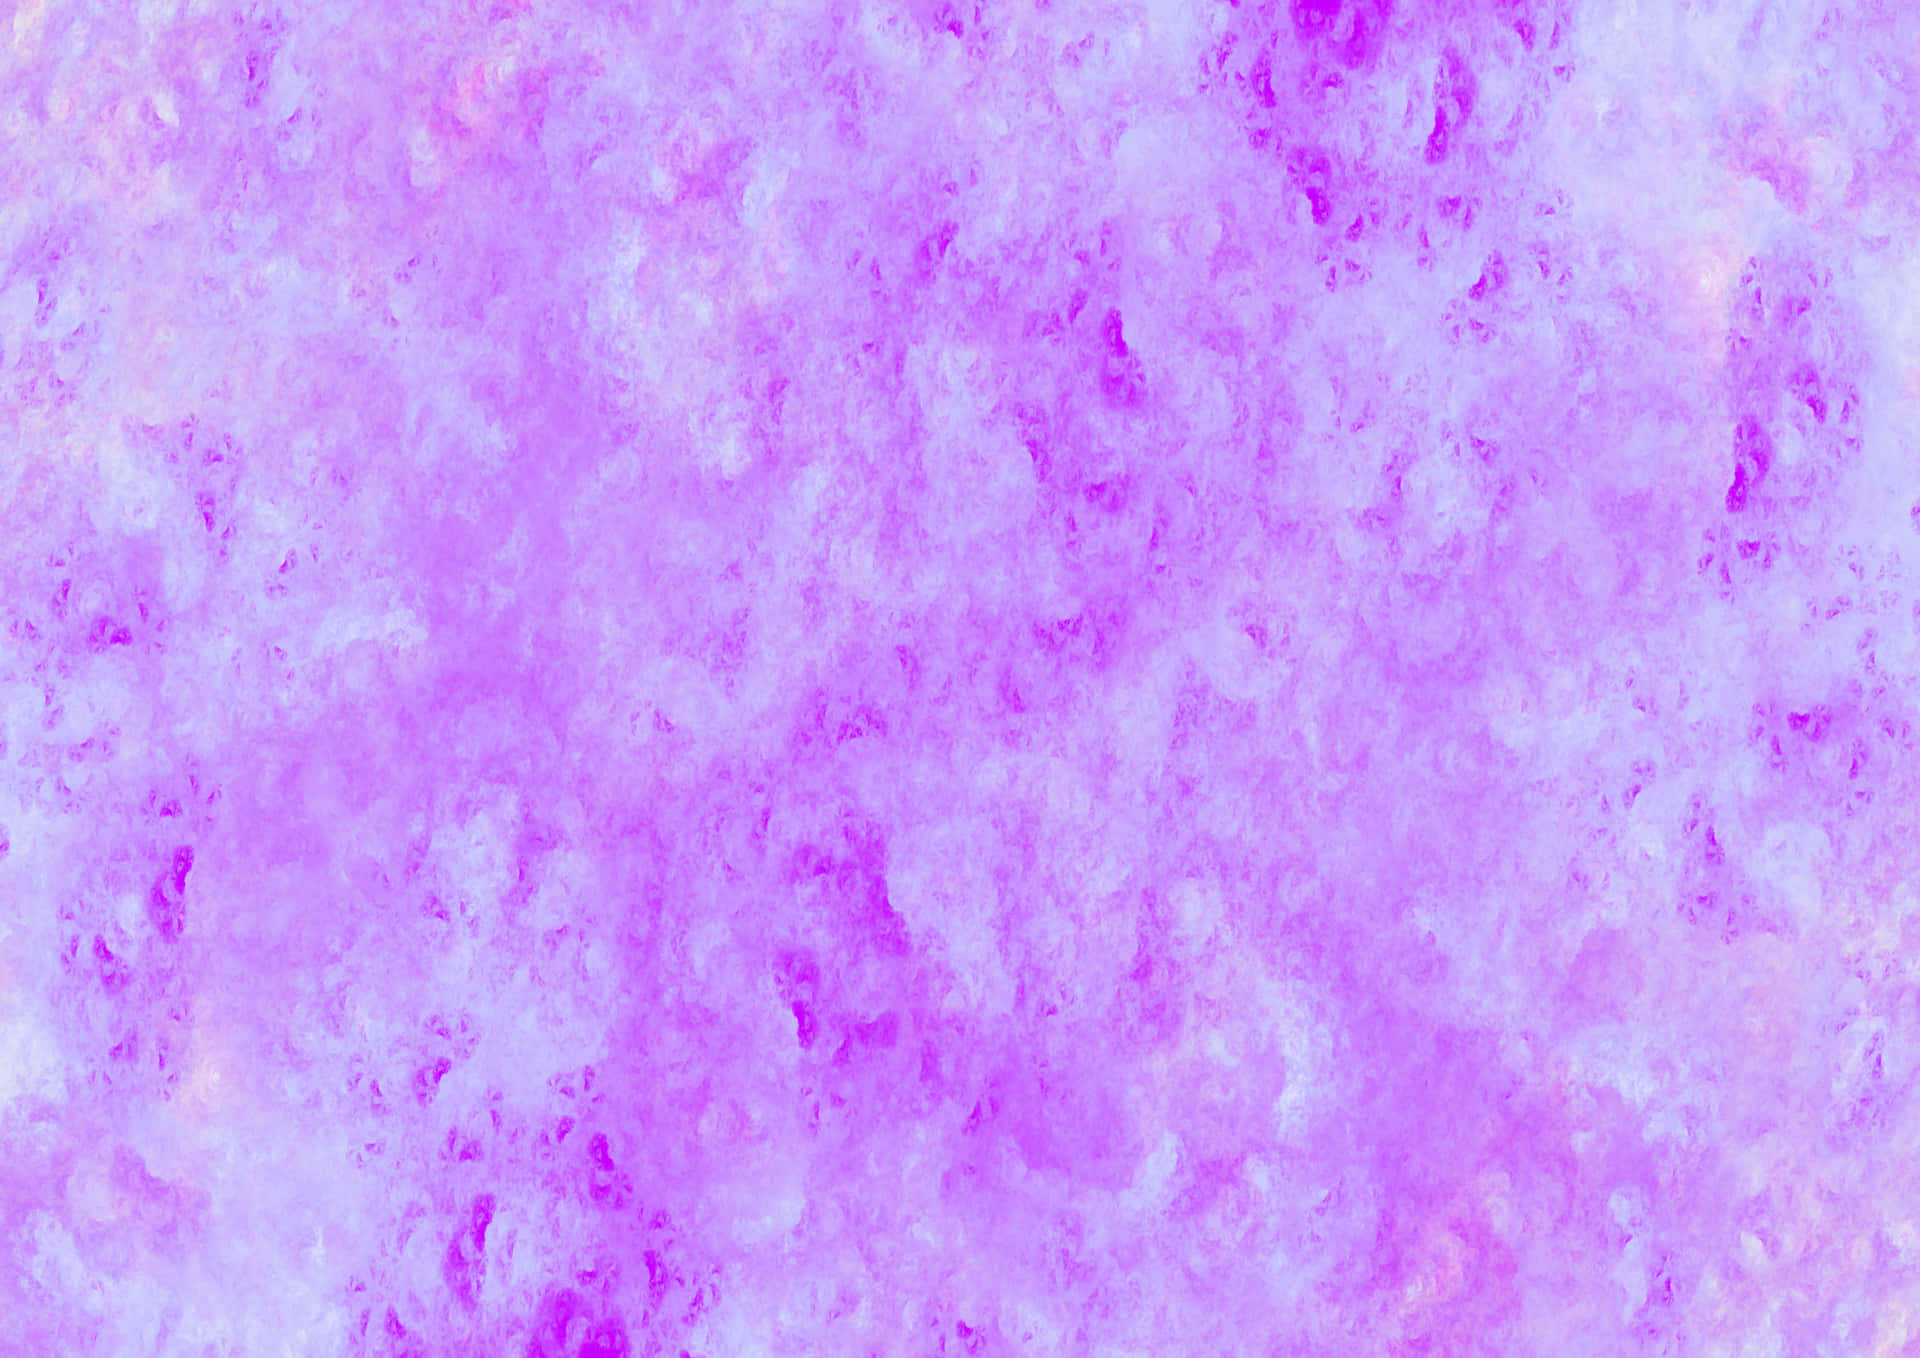 Purple And White Abstract Background Wallpaper